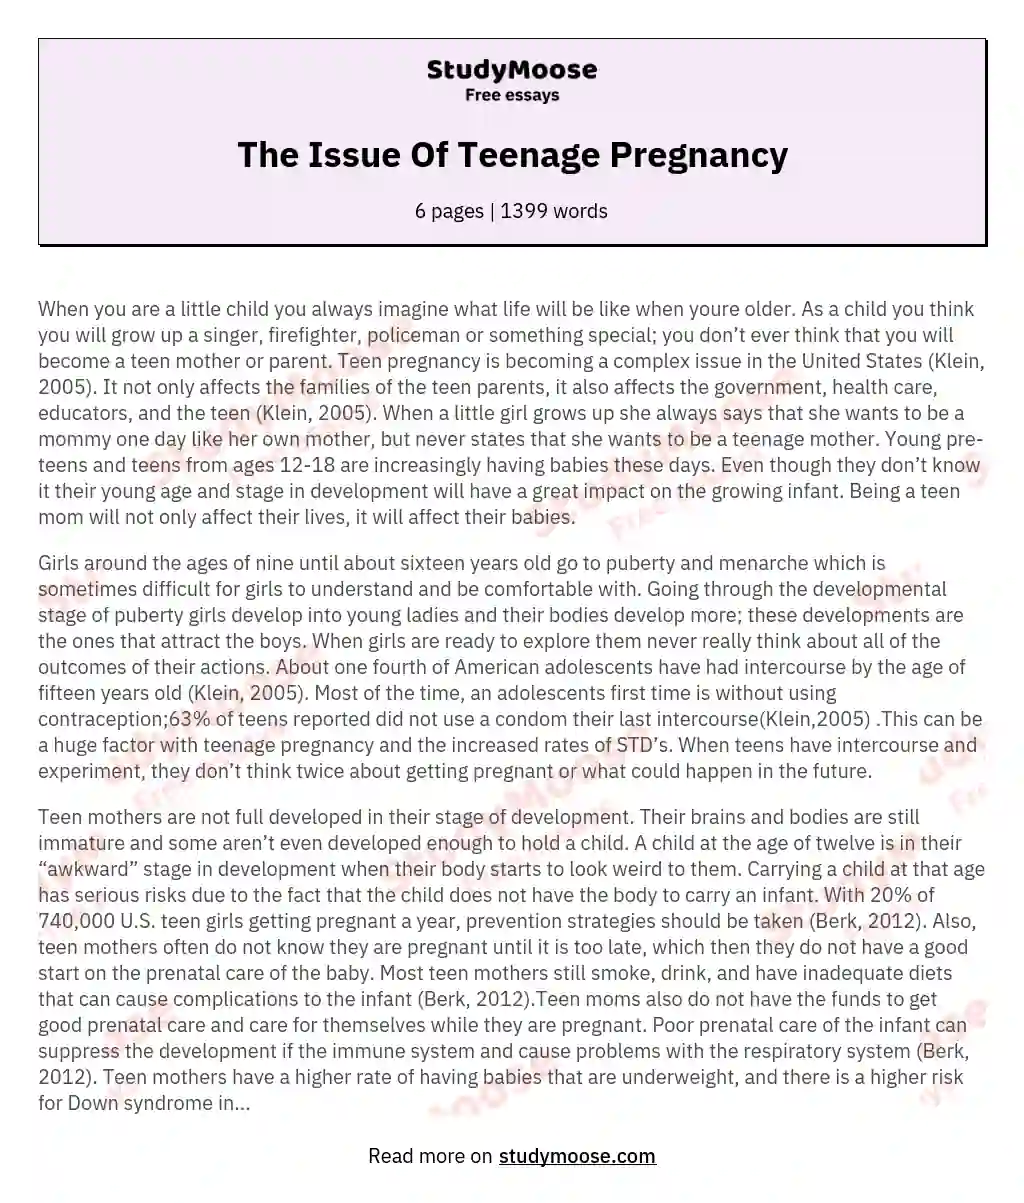 The Issue Of Teenage Pregnancy